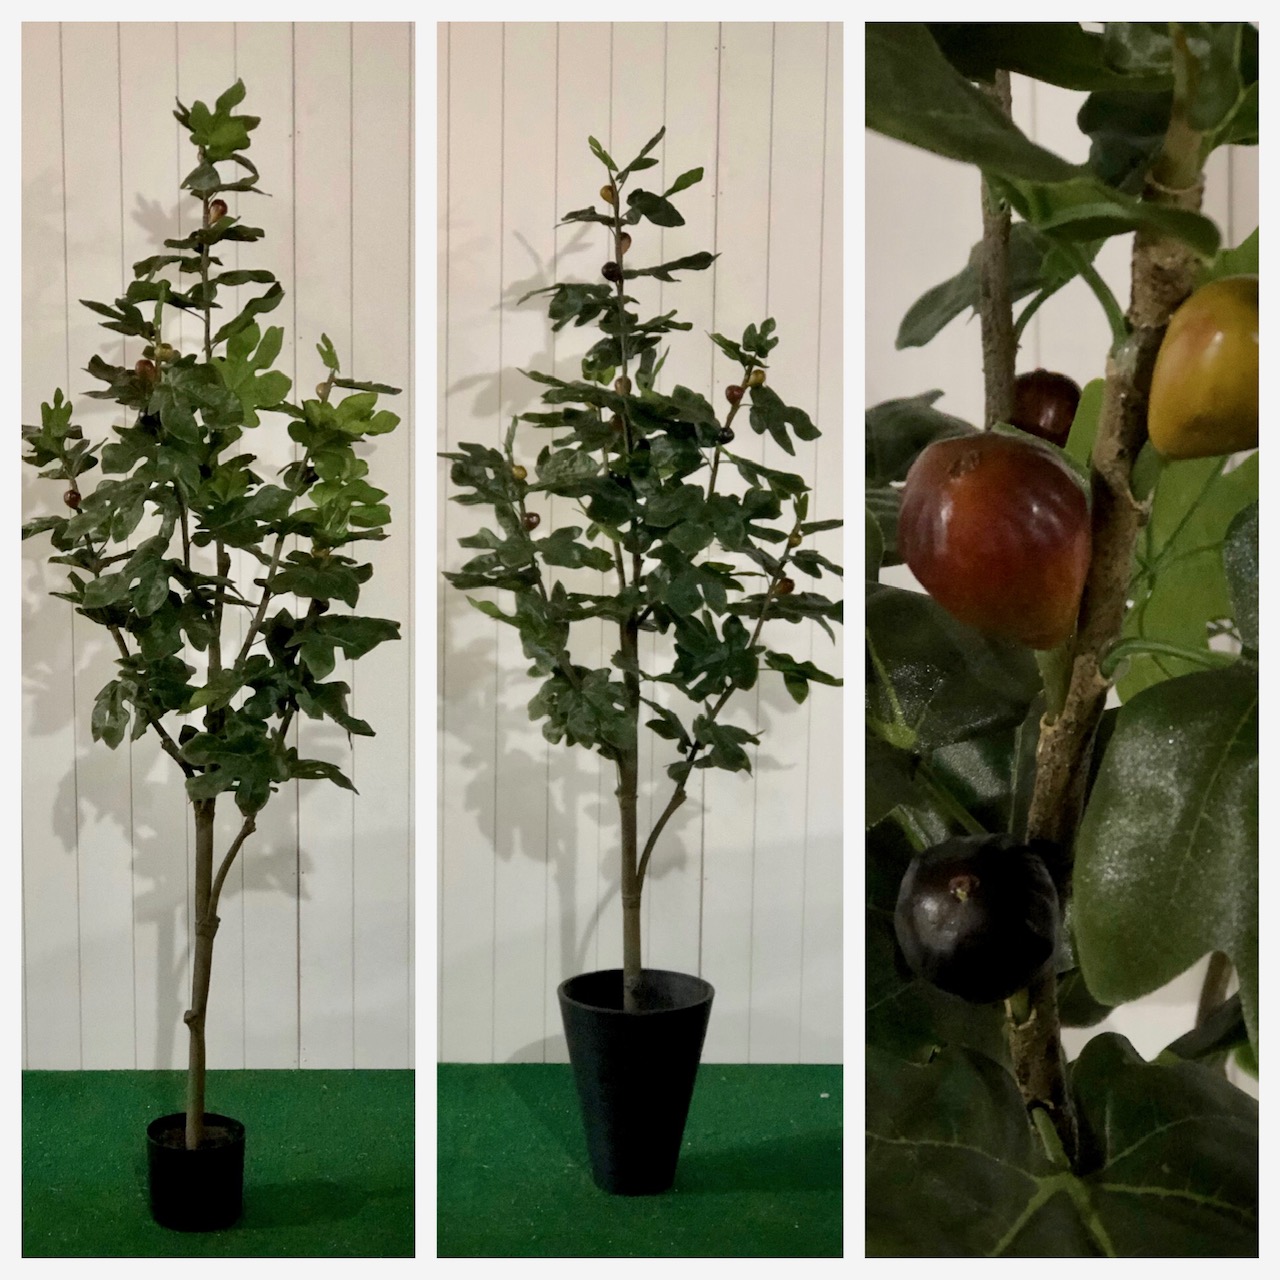 Fig Tree with Figs - Artificial Trees & Floor Plants